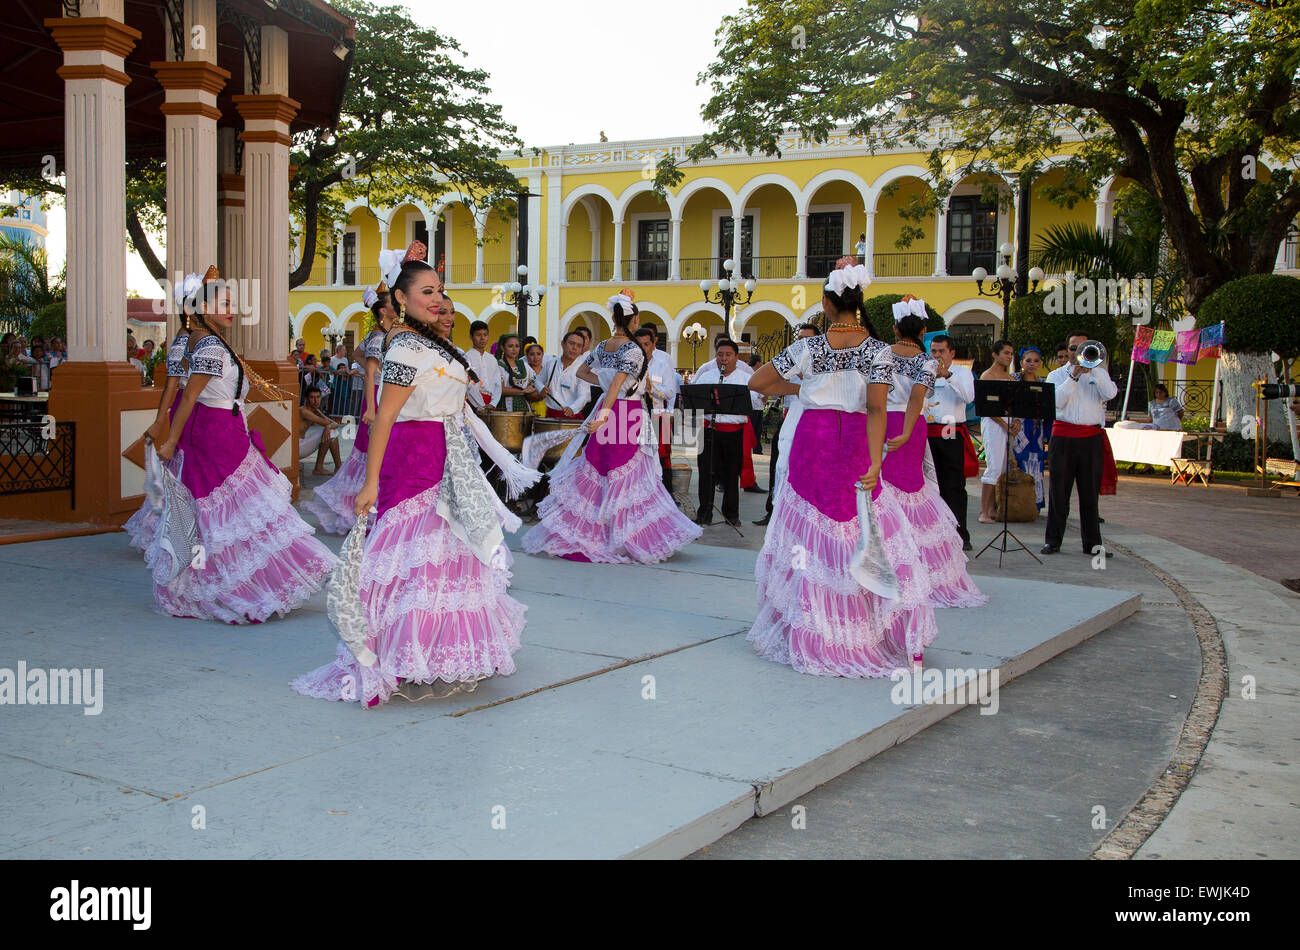 Dancers celebrate the Day of the Dead holiday in Mexico in macabre costumes Stock Photo